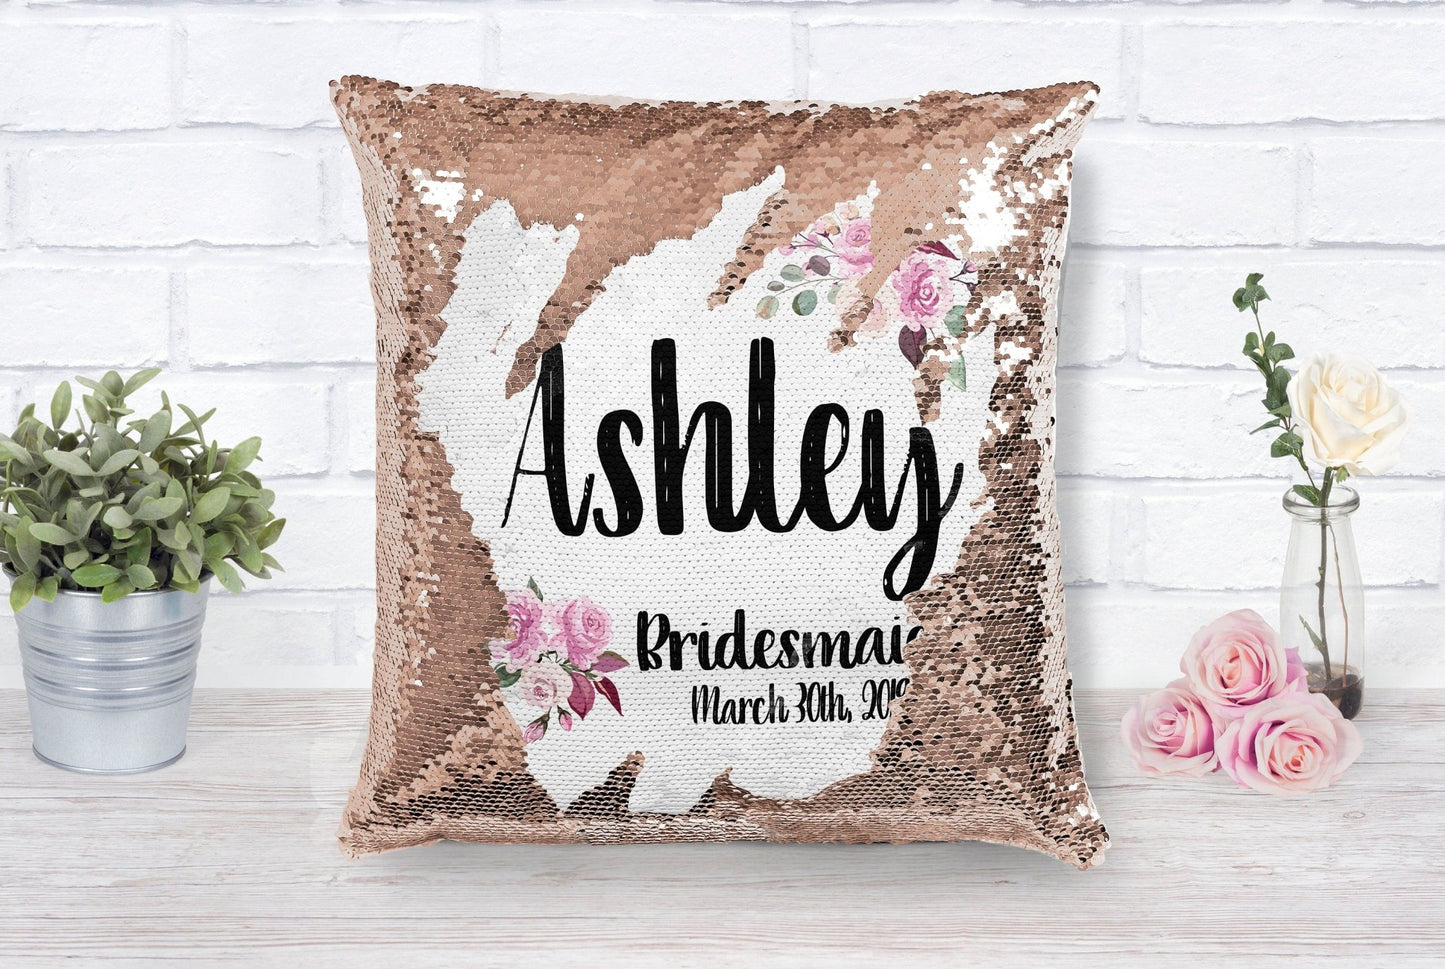 Bridesmaid Proposal Sequin Pillow Personalized Bridesmaid Gift Keepsake Gift for Bridemaids Gift for Her Bridal Gift Wedding Party Gift 1 - Squishy Cheeks